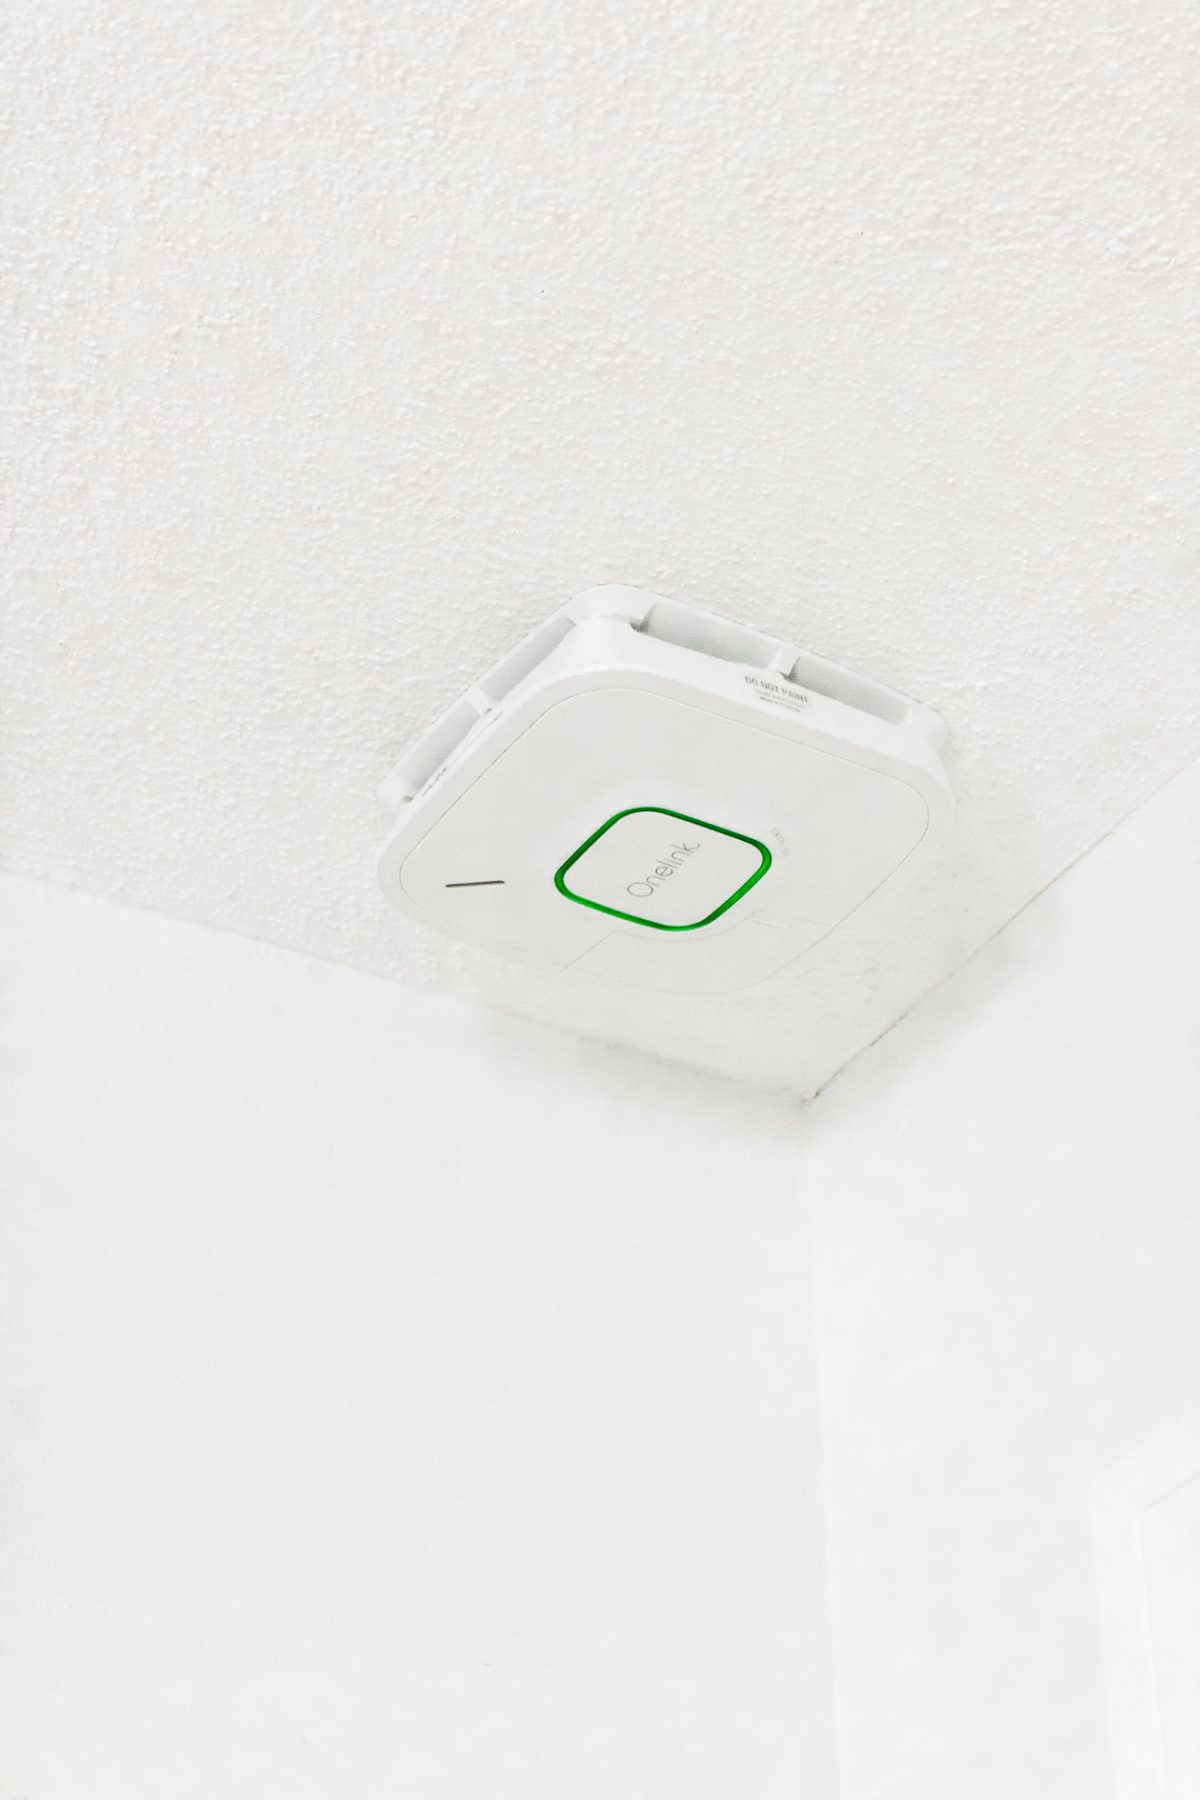 Fire Alarm on Ceiling in Bedroom - How to Keep Your Family Safe with Onelink Smart Smoke & Carbon Monoxide Alarm